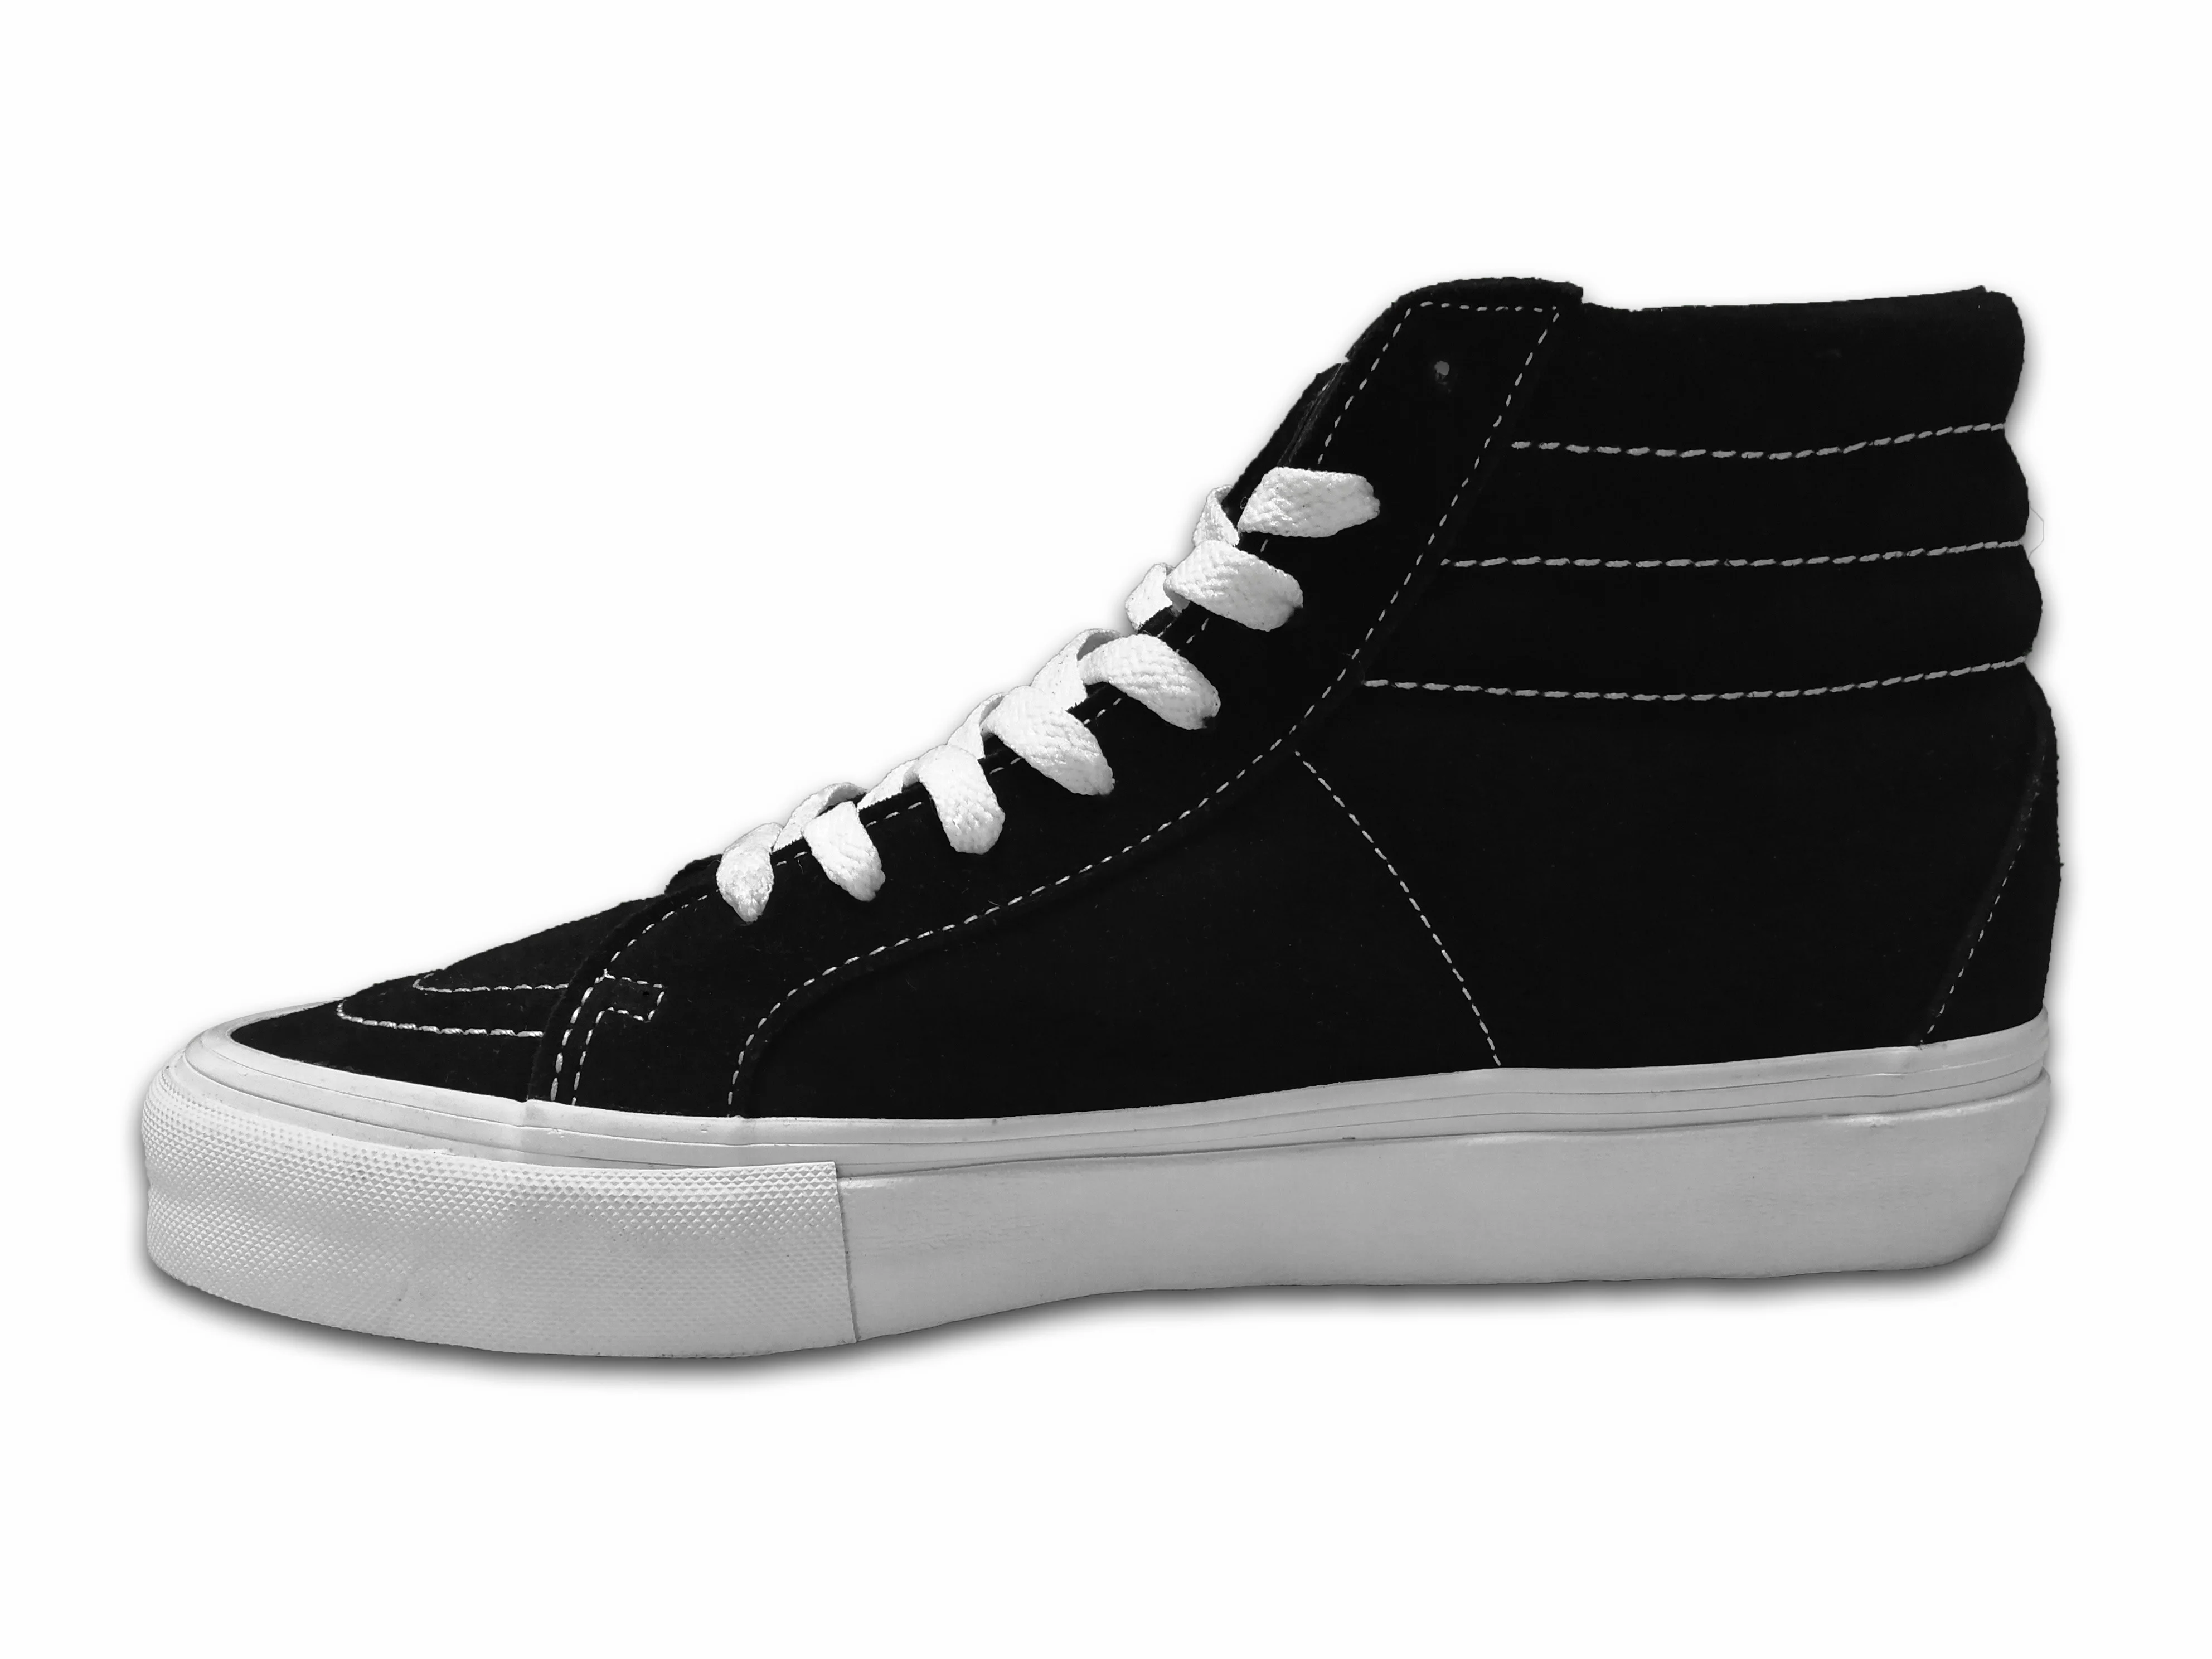 Mens black skateboard HighTop shoes from China